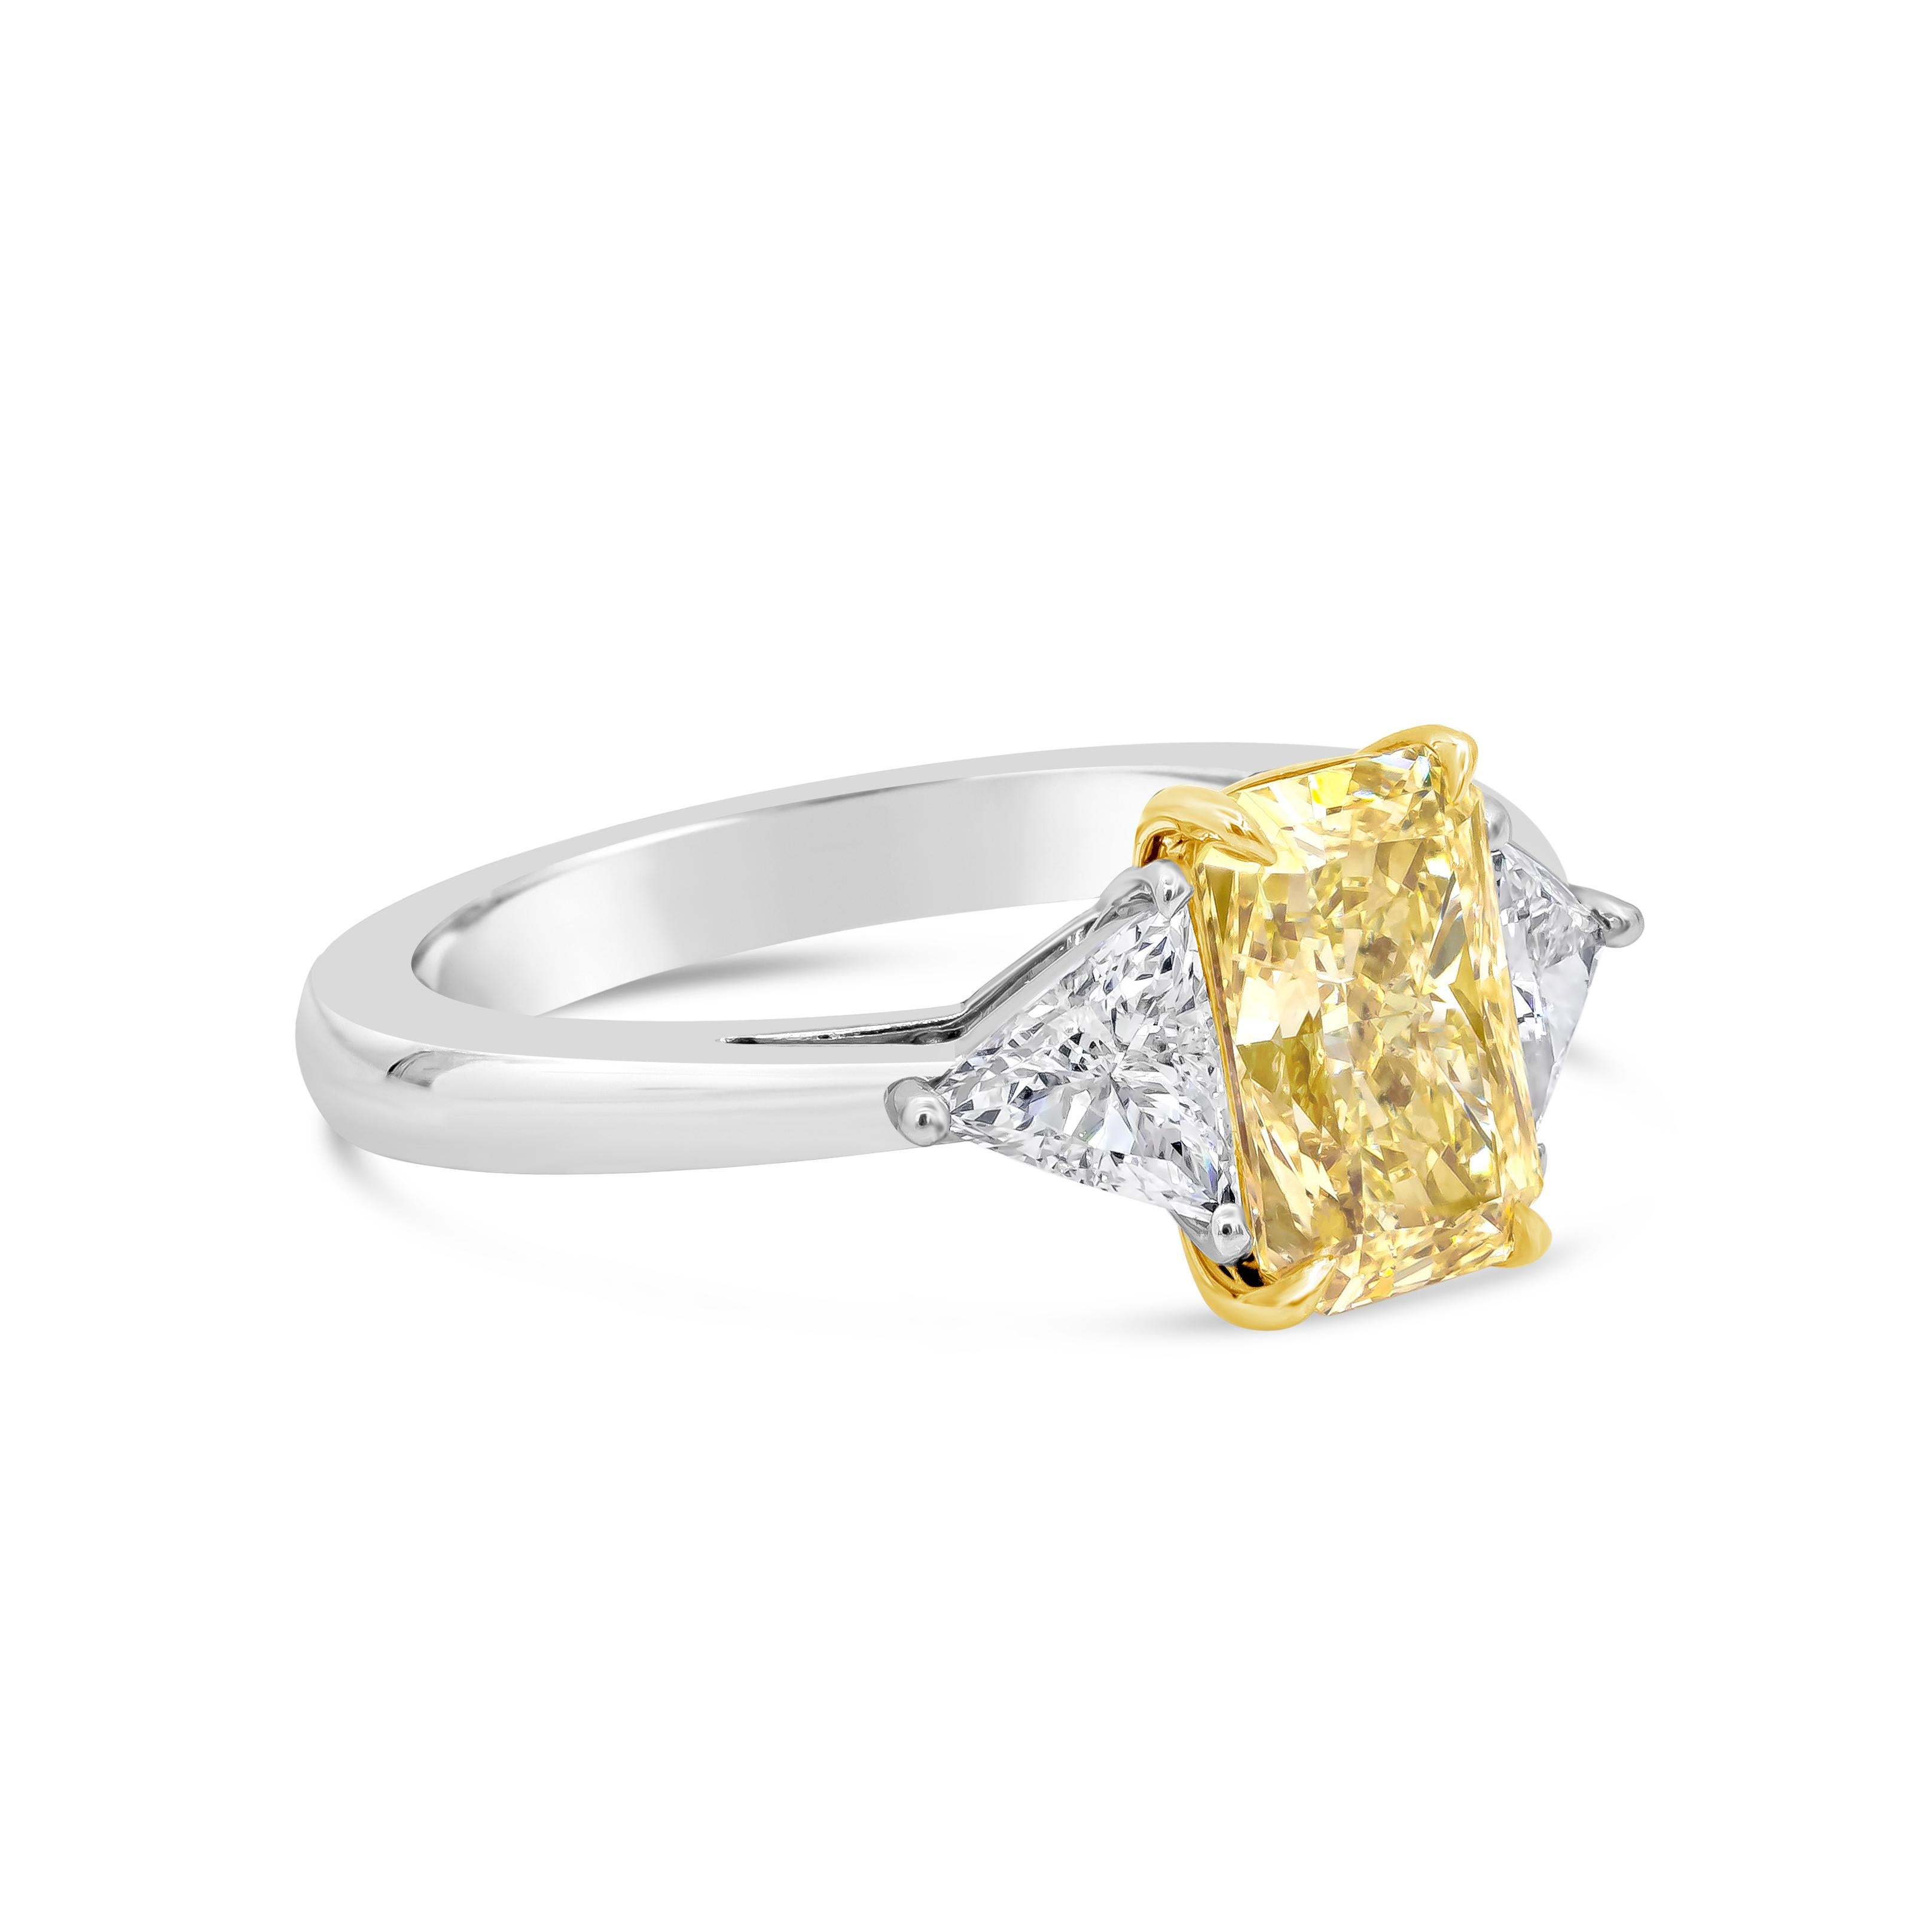 This gorgeous three stone engagement ring features a GIA Certified 2.02 carat radiant cut fancy yellow diamond, I1 in Clarity, Set in a 18K yellow gold basket, Flanked by trillion diamonds on each side weighing 0.59 carats total. Made in platinum.